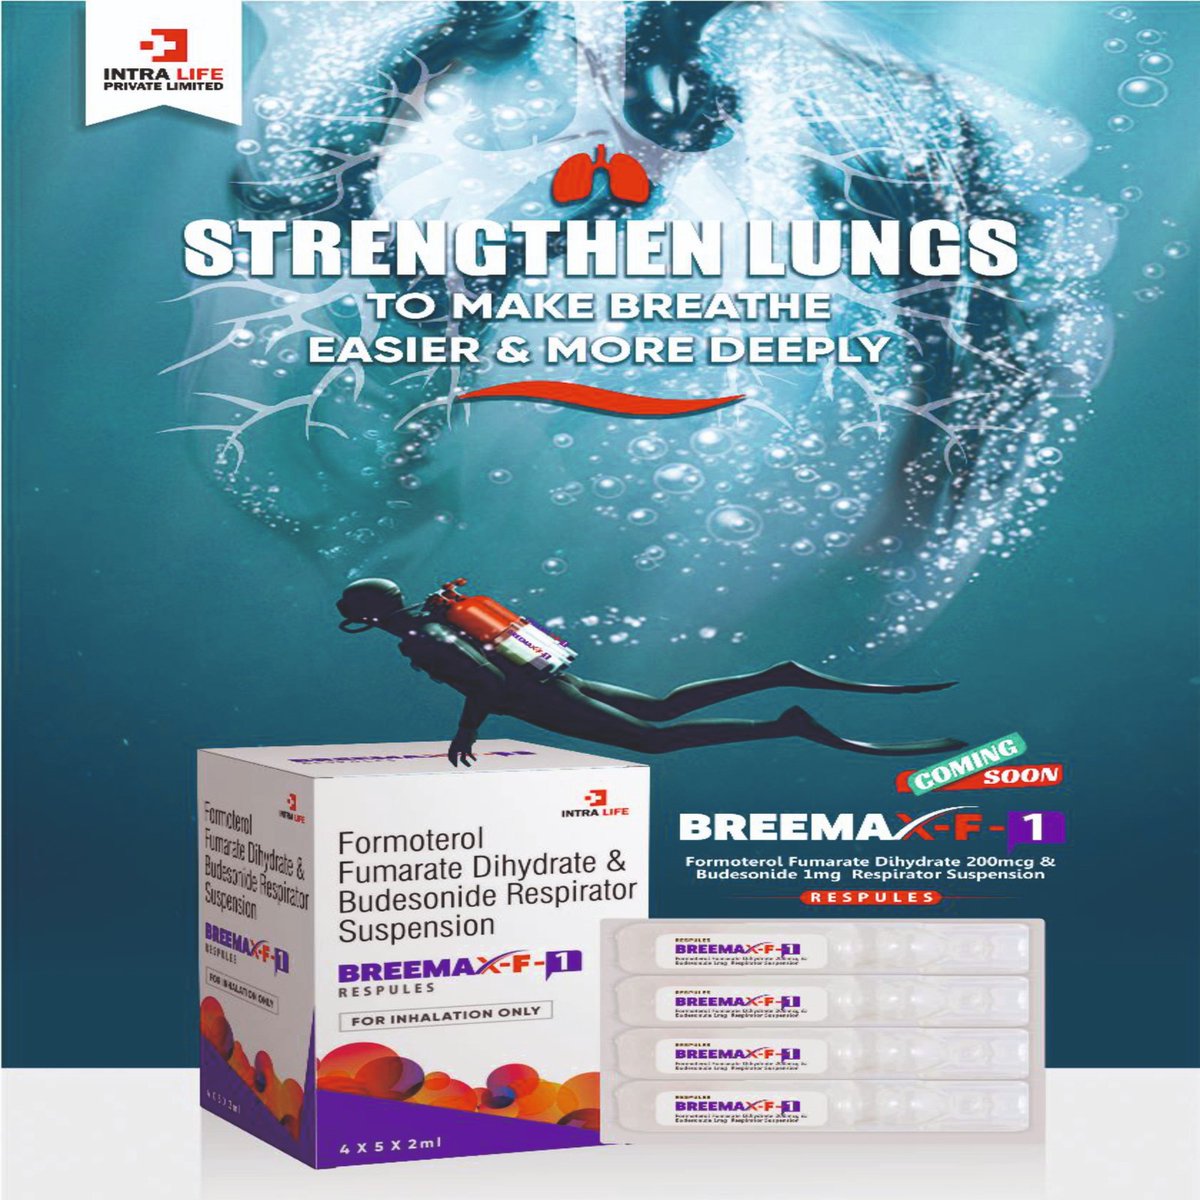 'Unleash Easy Breathing: Bentamin-LS Drops (Coming Soon)! Banish cough & breathe freely. Stay tuned for this game-changing respiratory solution! #BentaminLS #RespiratoryWellness #ComingSoon #CoughRelief #HealthRevolution'
📞 Call 096069 40521